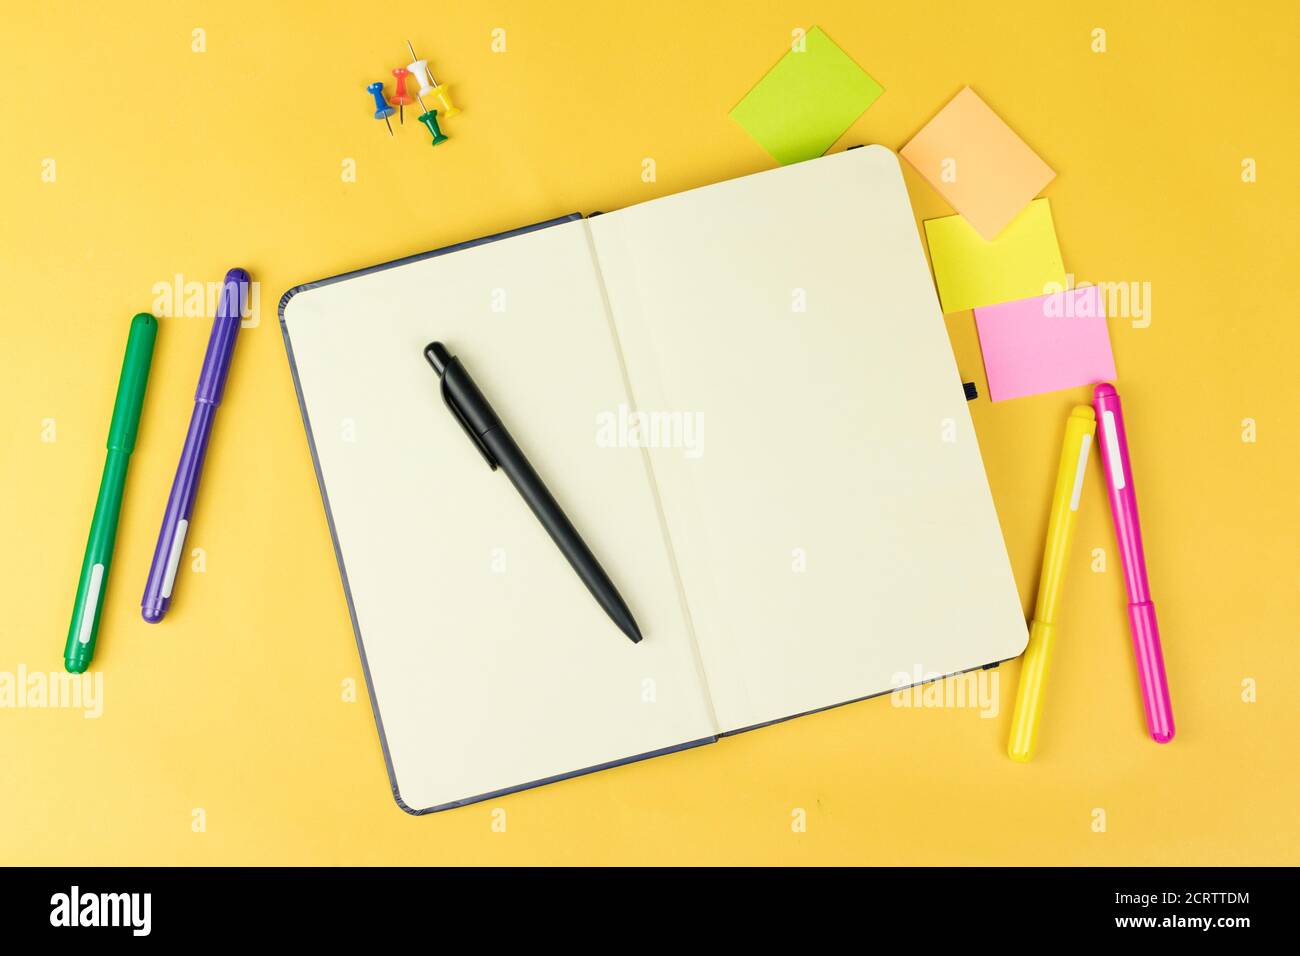 Top view of blank notebook and school supplies like colored markers, sticker and clipers on yellow background, space for text. Stock Photo